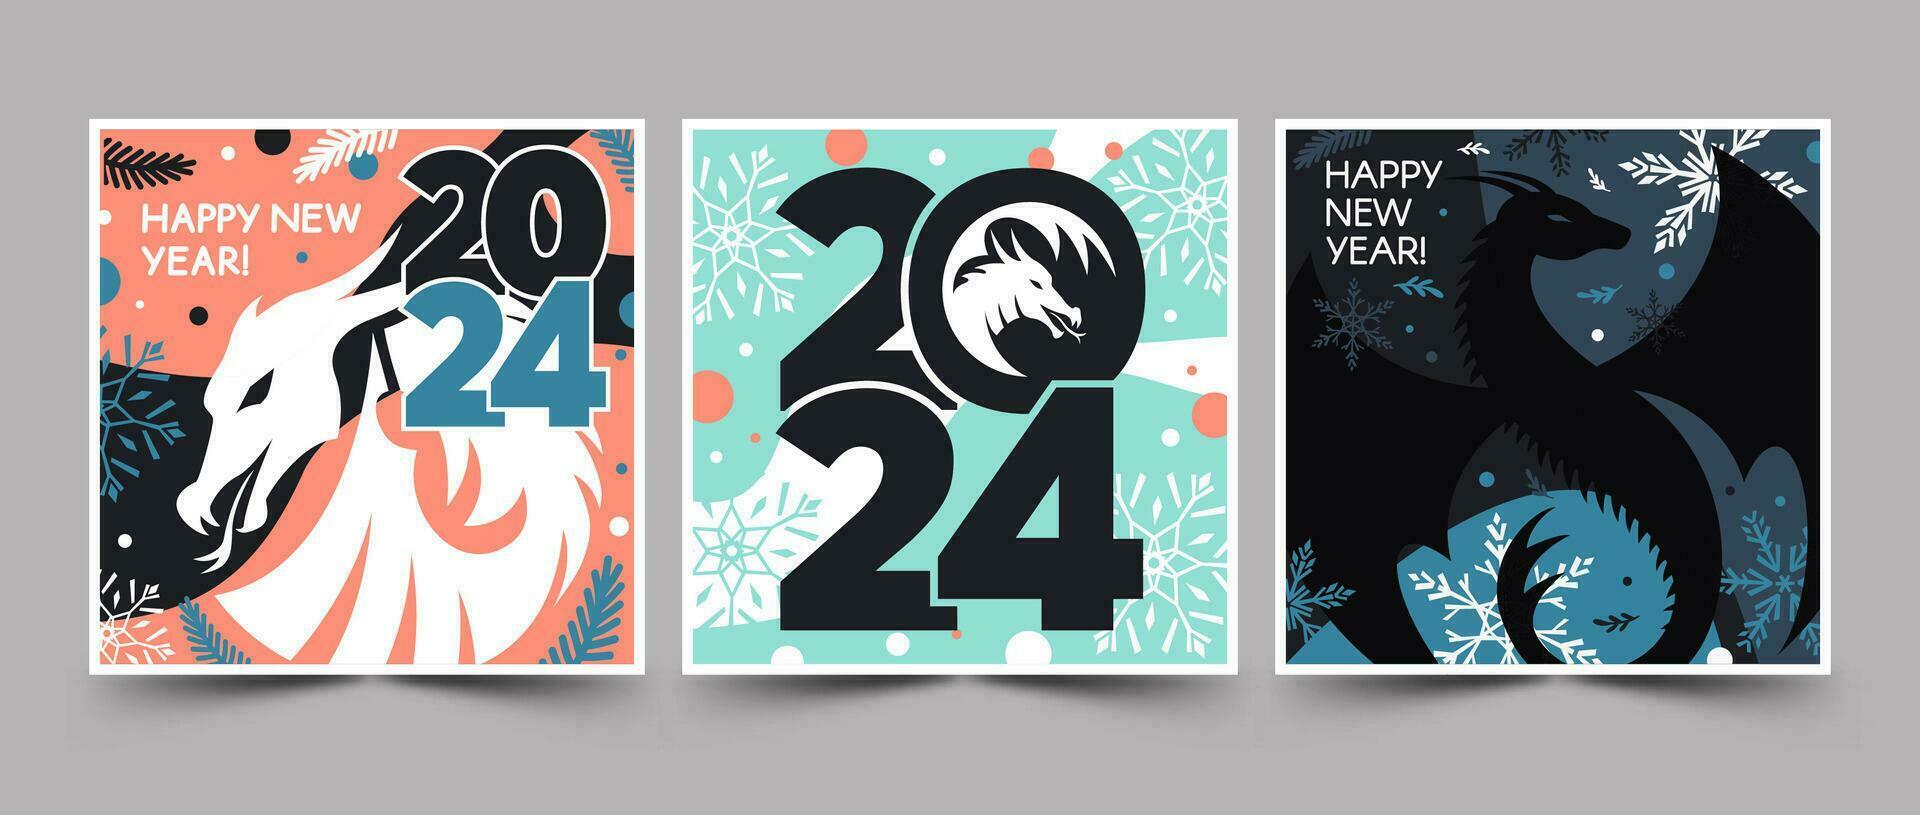 Set of Happy New Year 2024 square banners with dragons, balloons, snowflakes, and text in pink, blue, green, and black colors. Vector modern flat illustration.